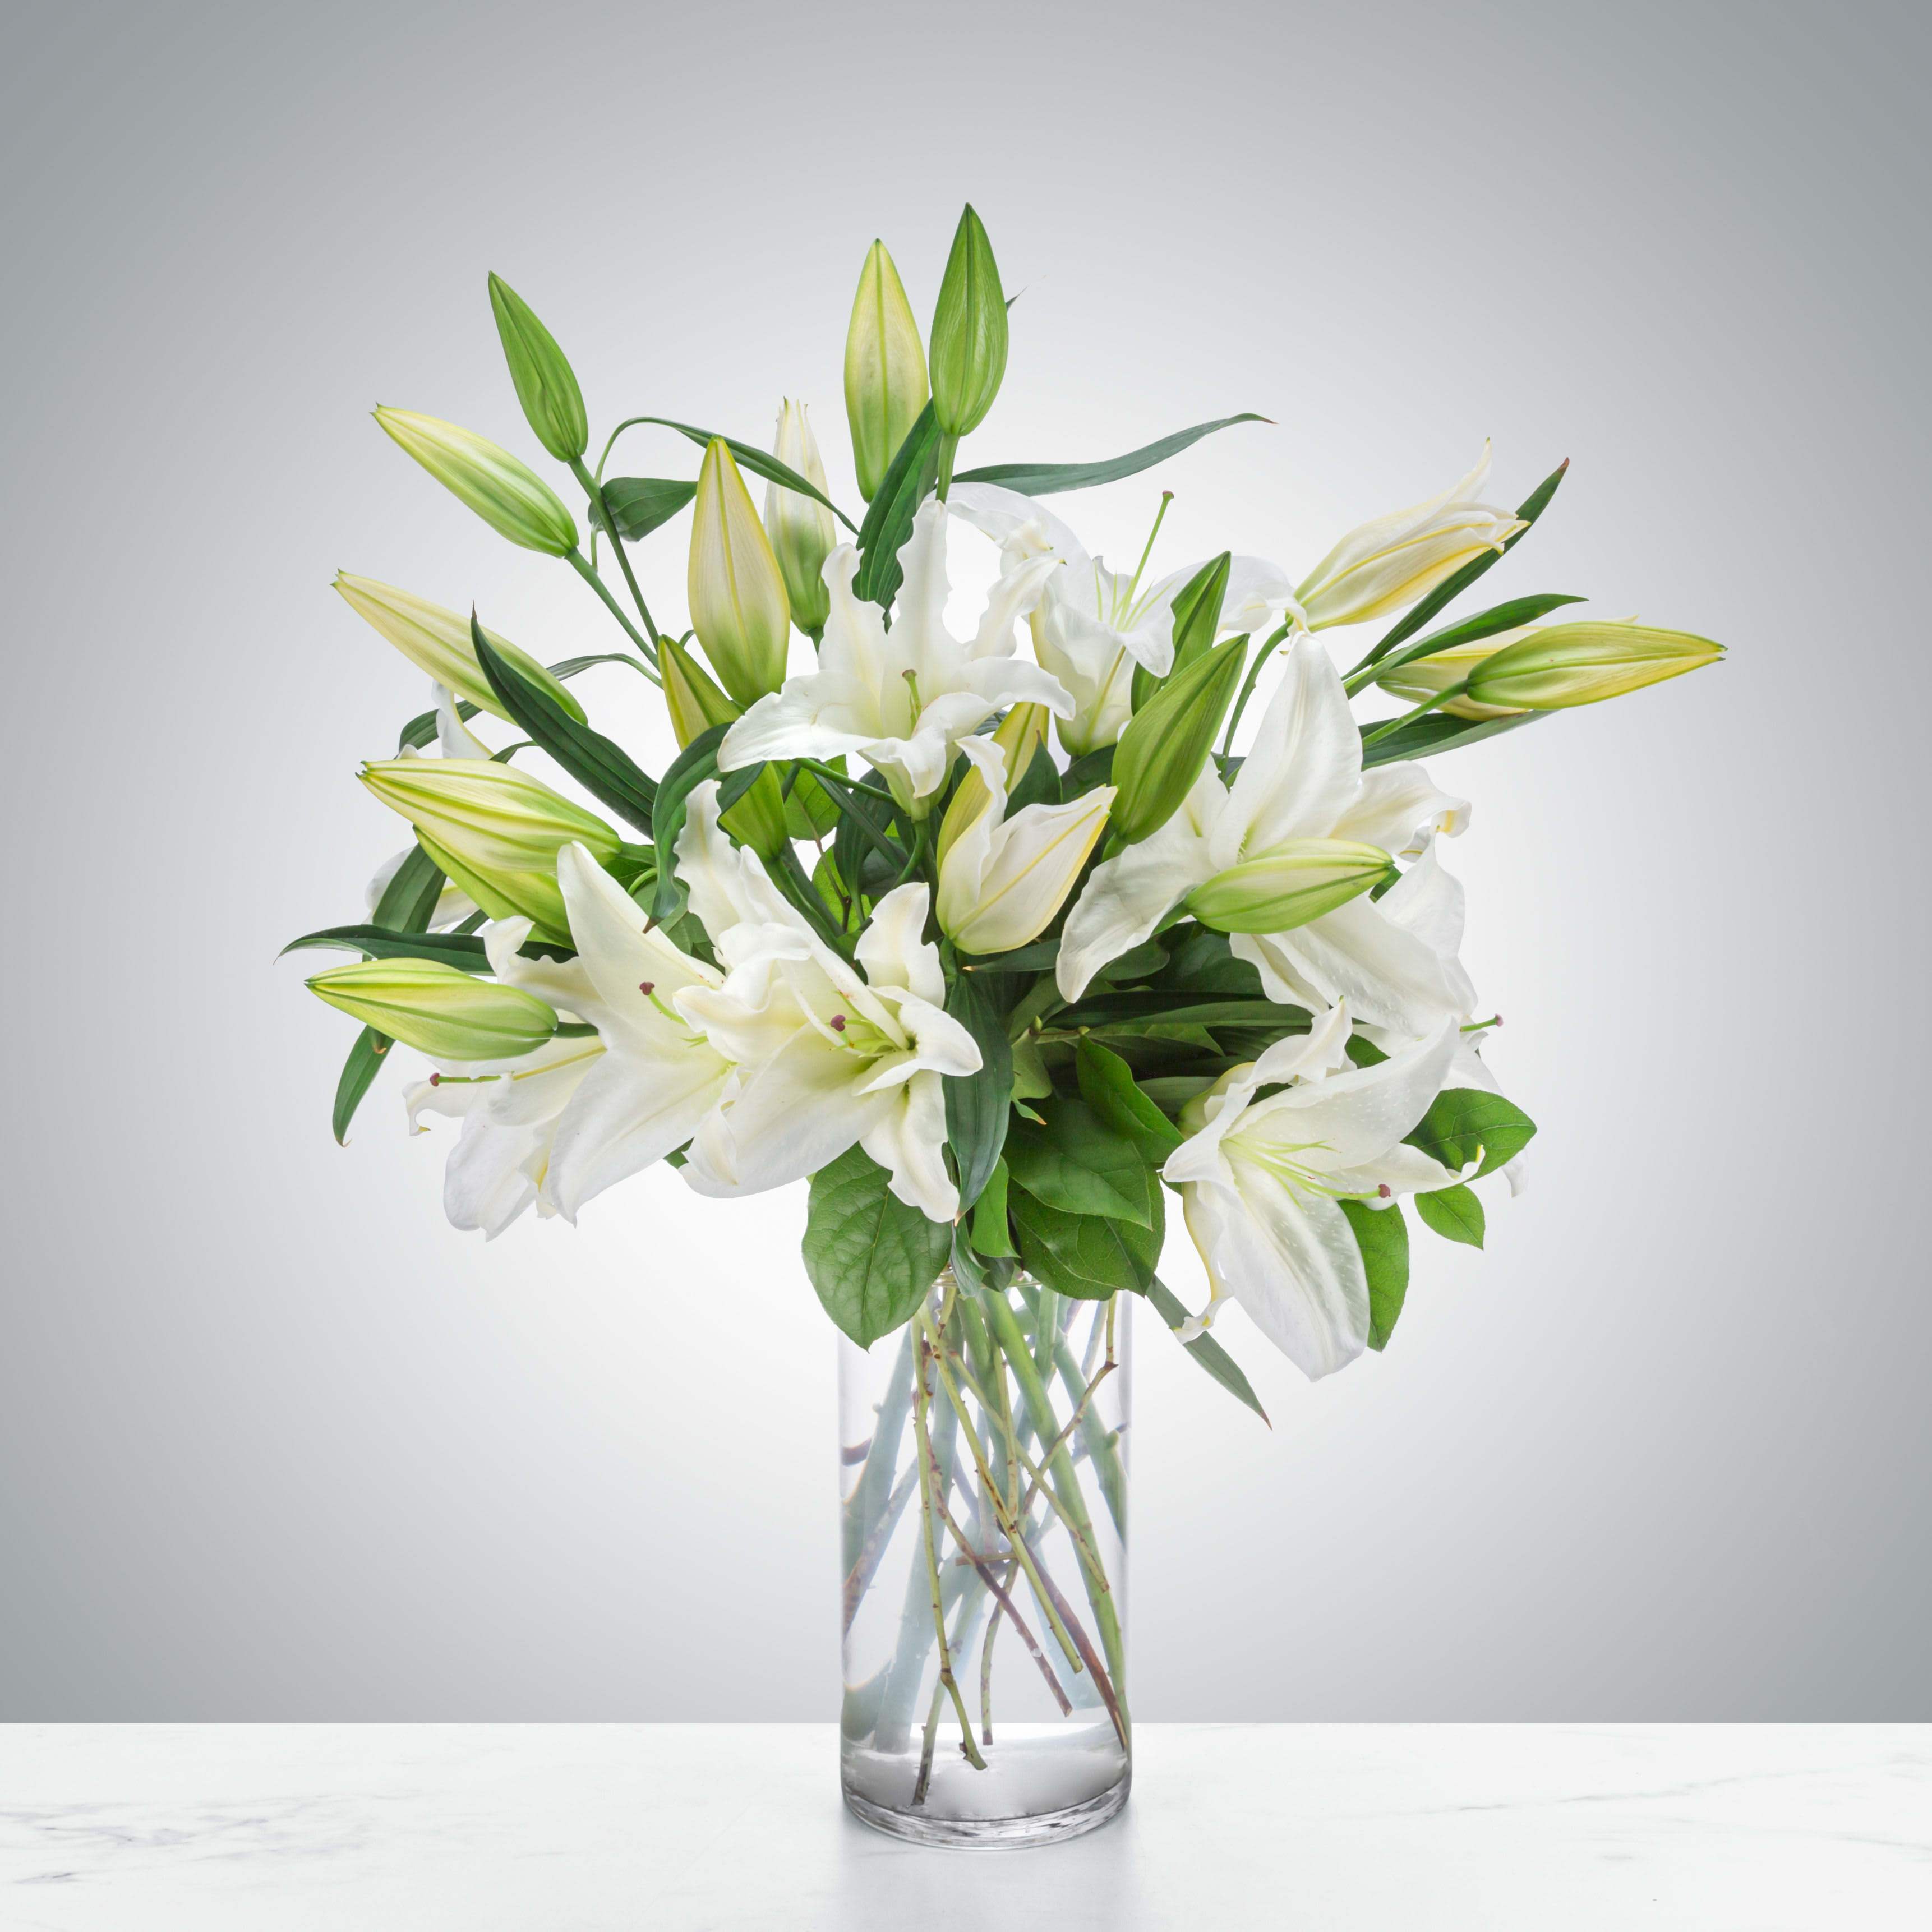 Peaceful Evening  - White lilies stand tall and beautiful. Send an impactful gift to somebody whether it be for saying I am sorry or celebrating the new year. This arrangement instantly elevates any room and fills the space with that distinct sweet-smelling lily perfume.  